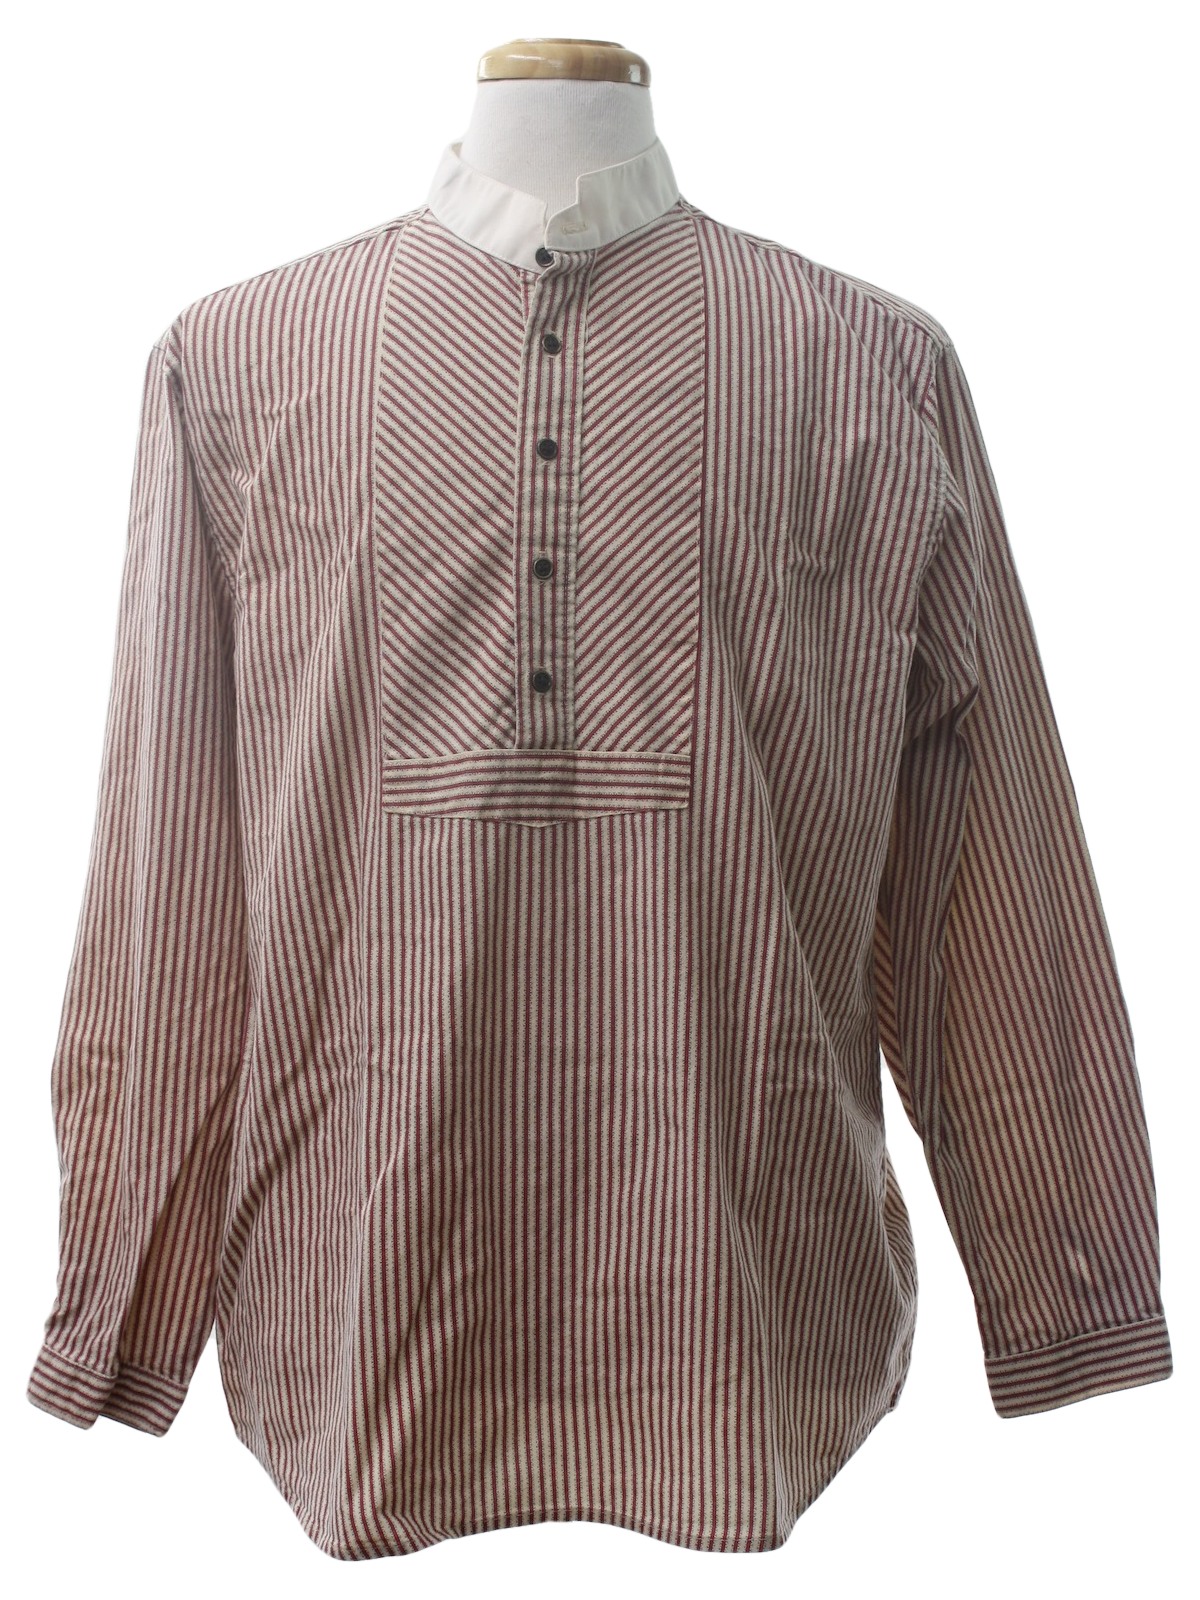 Western Shirt: 90s -Pre 1920s Style -Wah Maker- Mens cotton red and tan ...